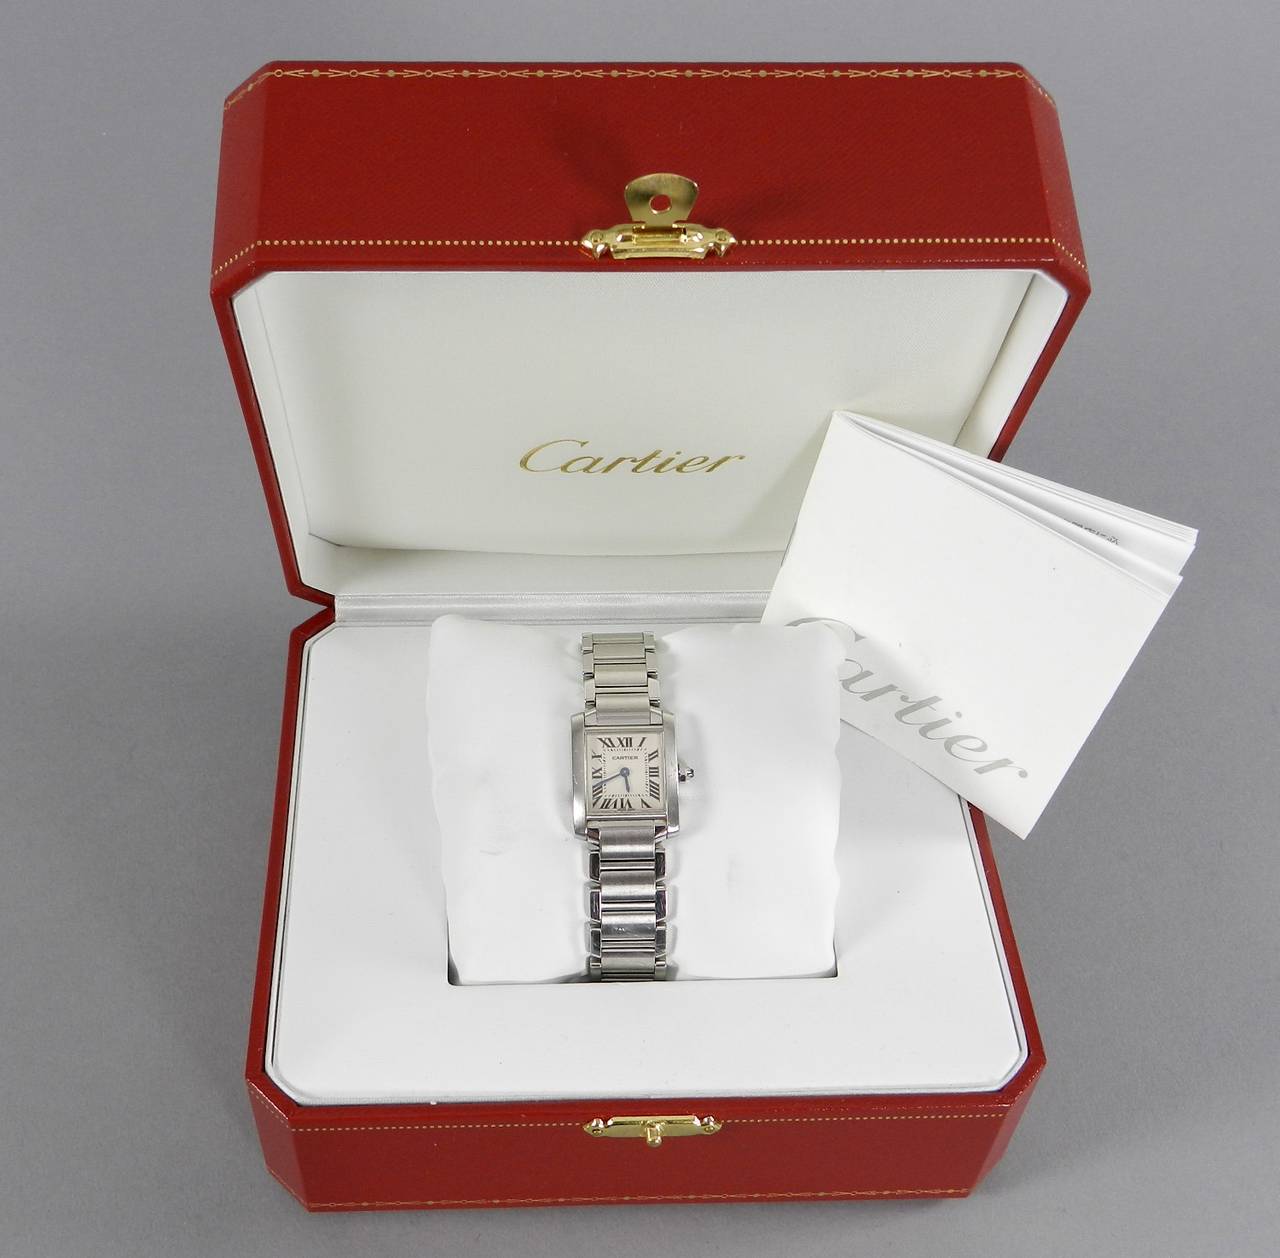 Cartier Tank Francaise ladies stainless steel watch.  With original box and booklet. No original receipt or papers. Serial number BB112761.  Front face measures 7/8